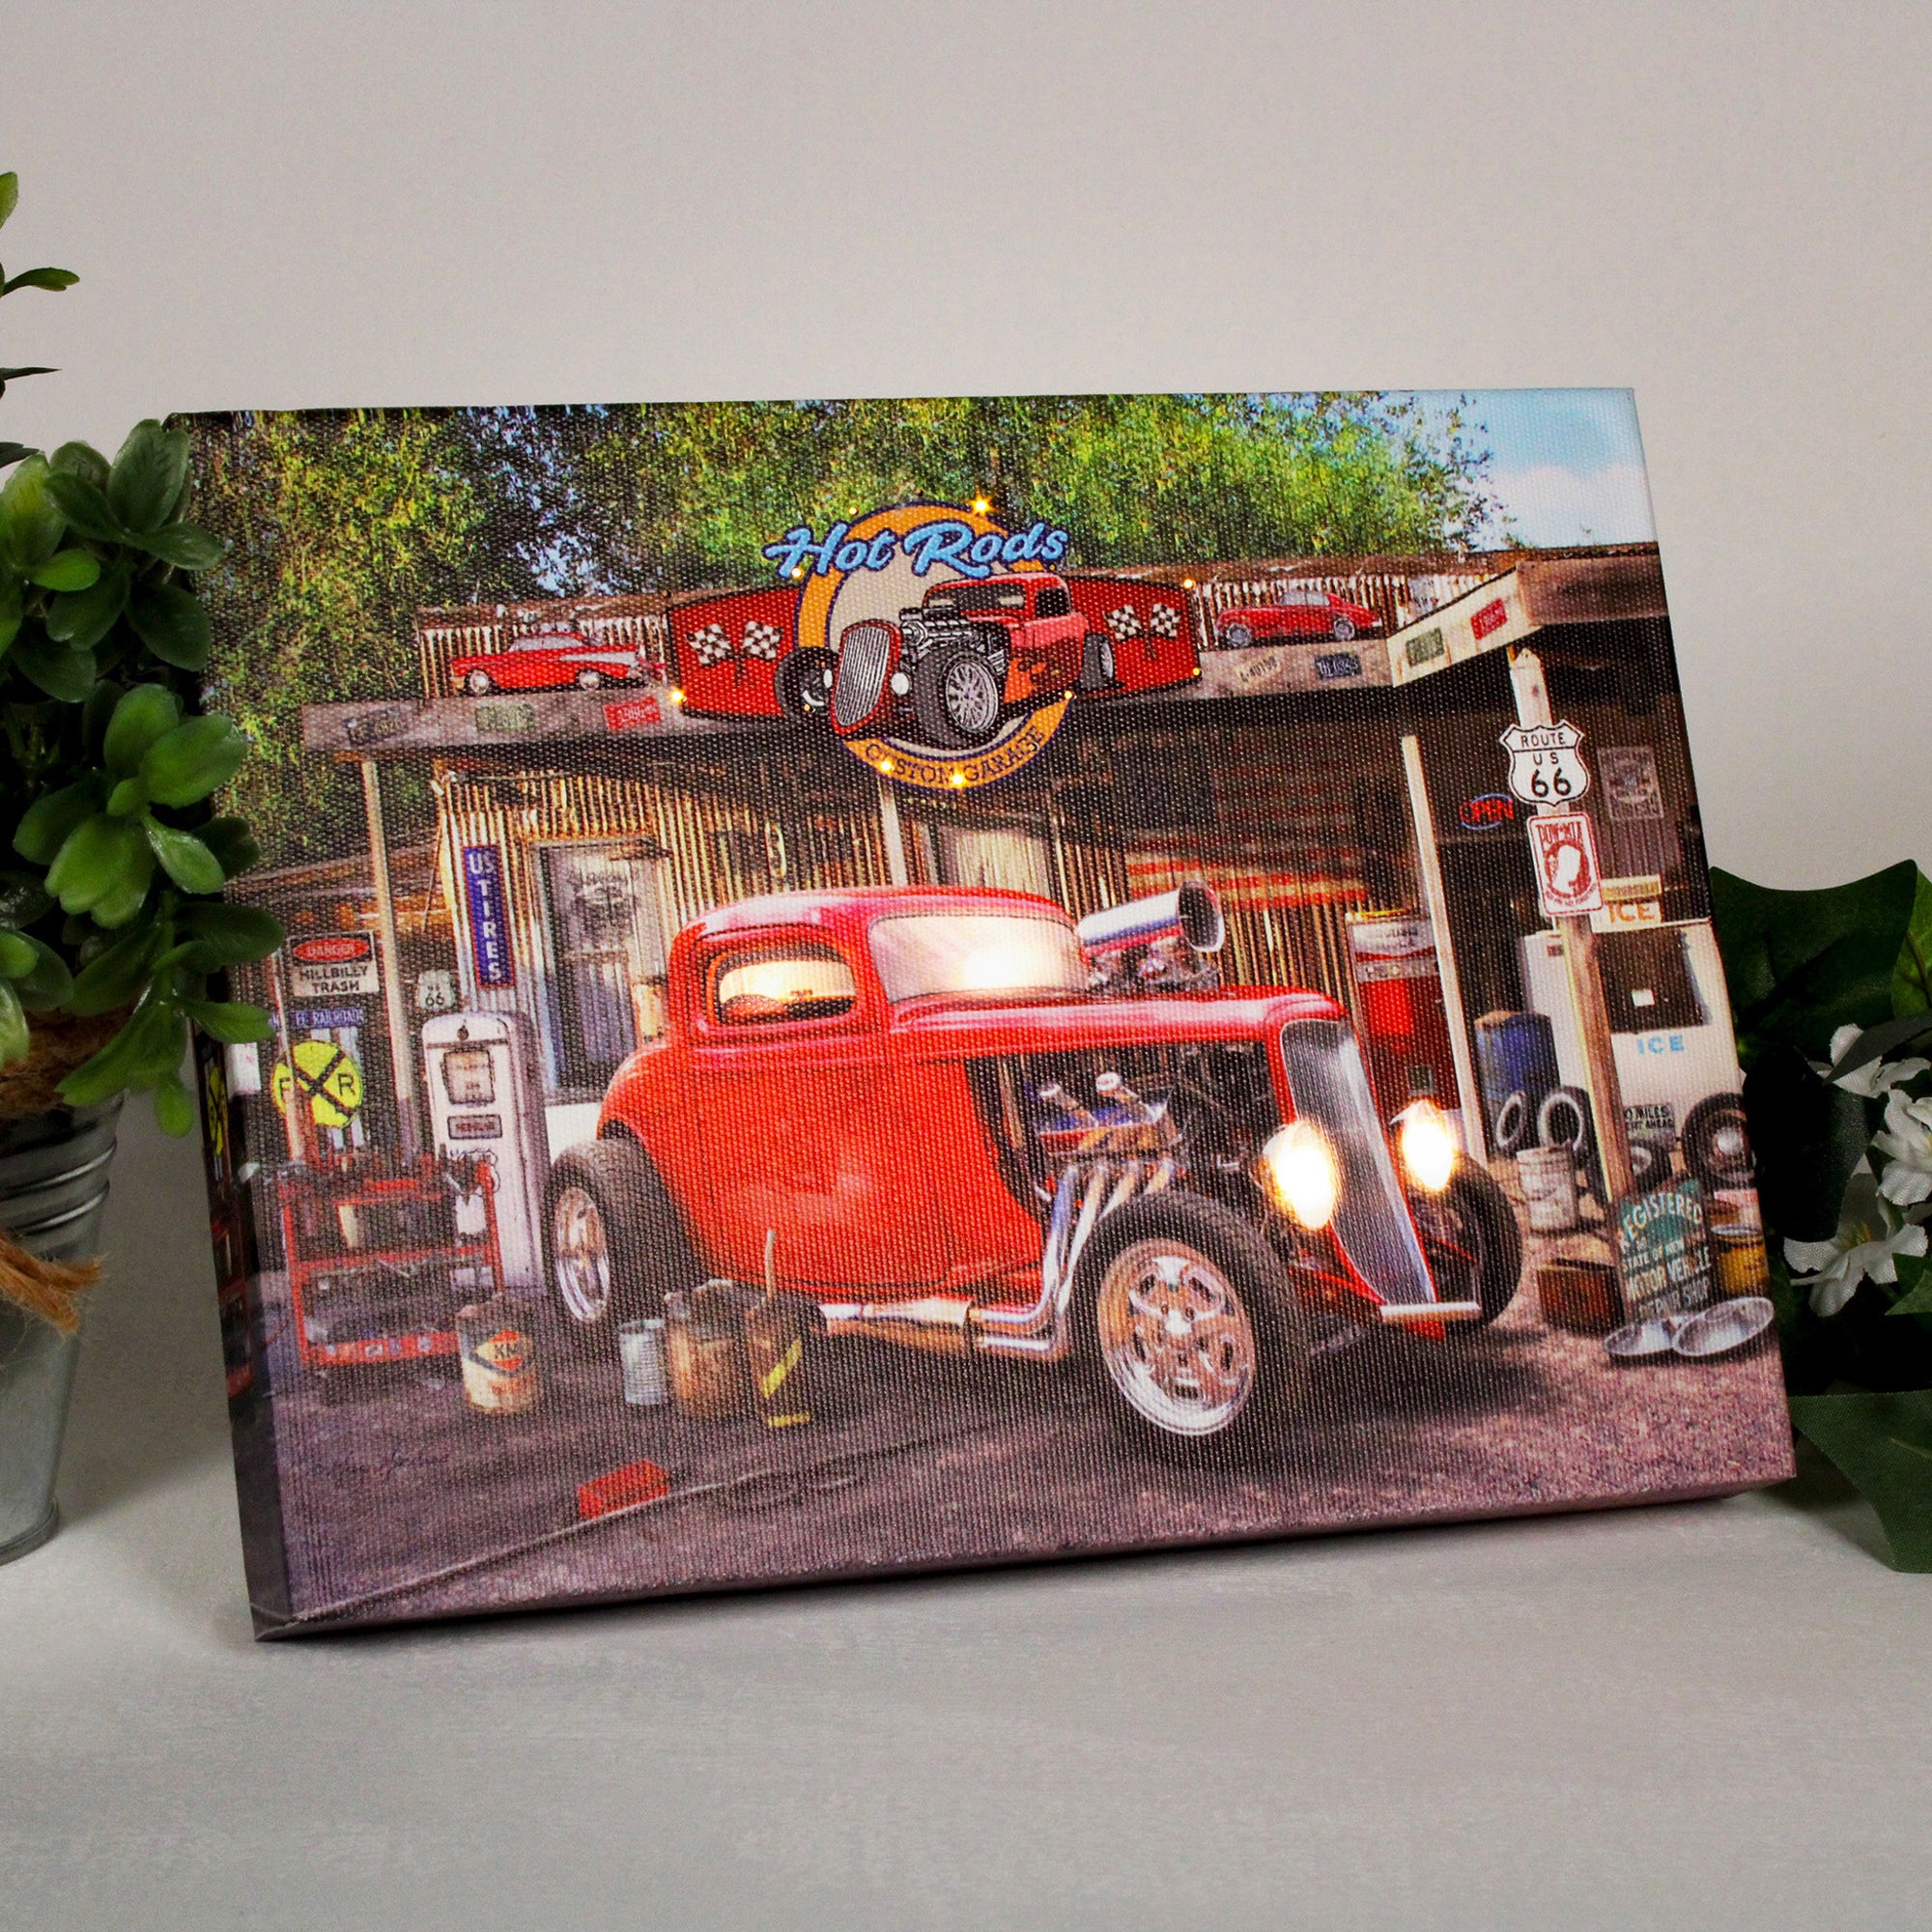 Hot Rod Garage 8x6 Lighted Tabletop Canvas